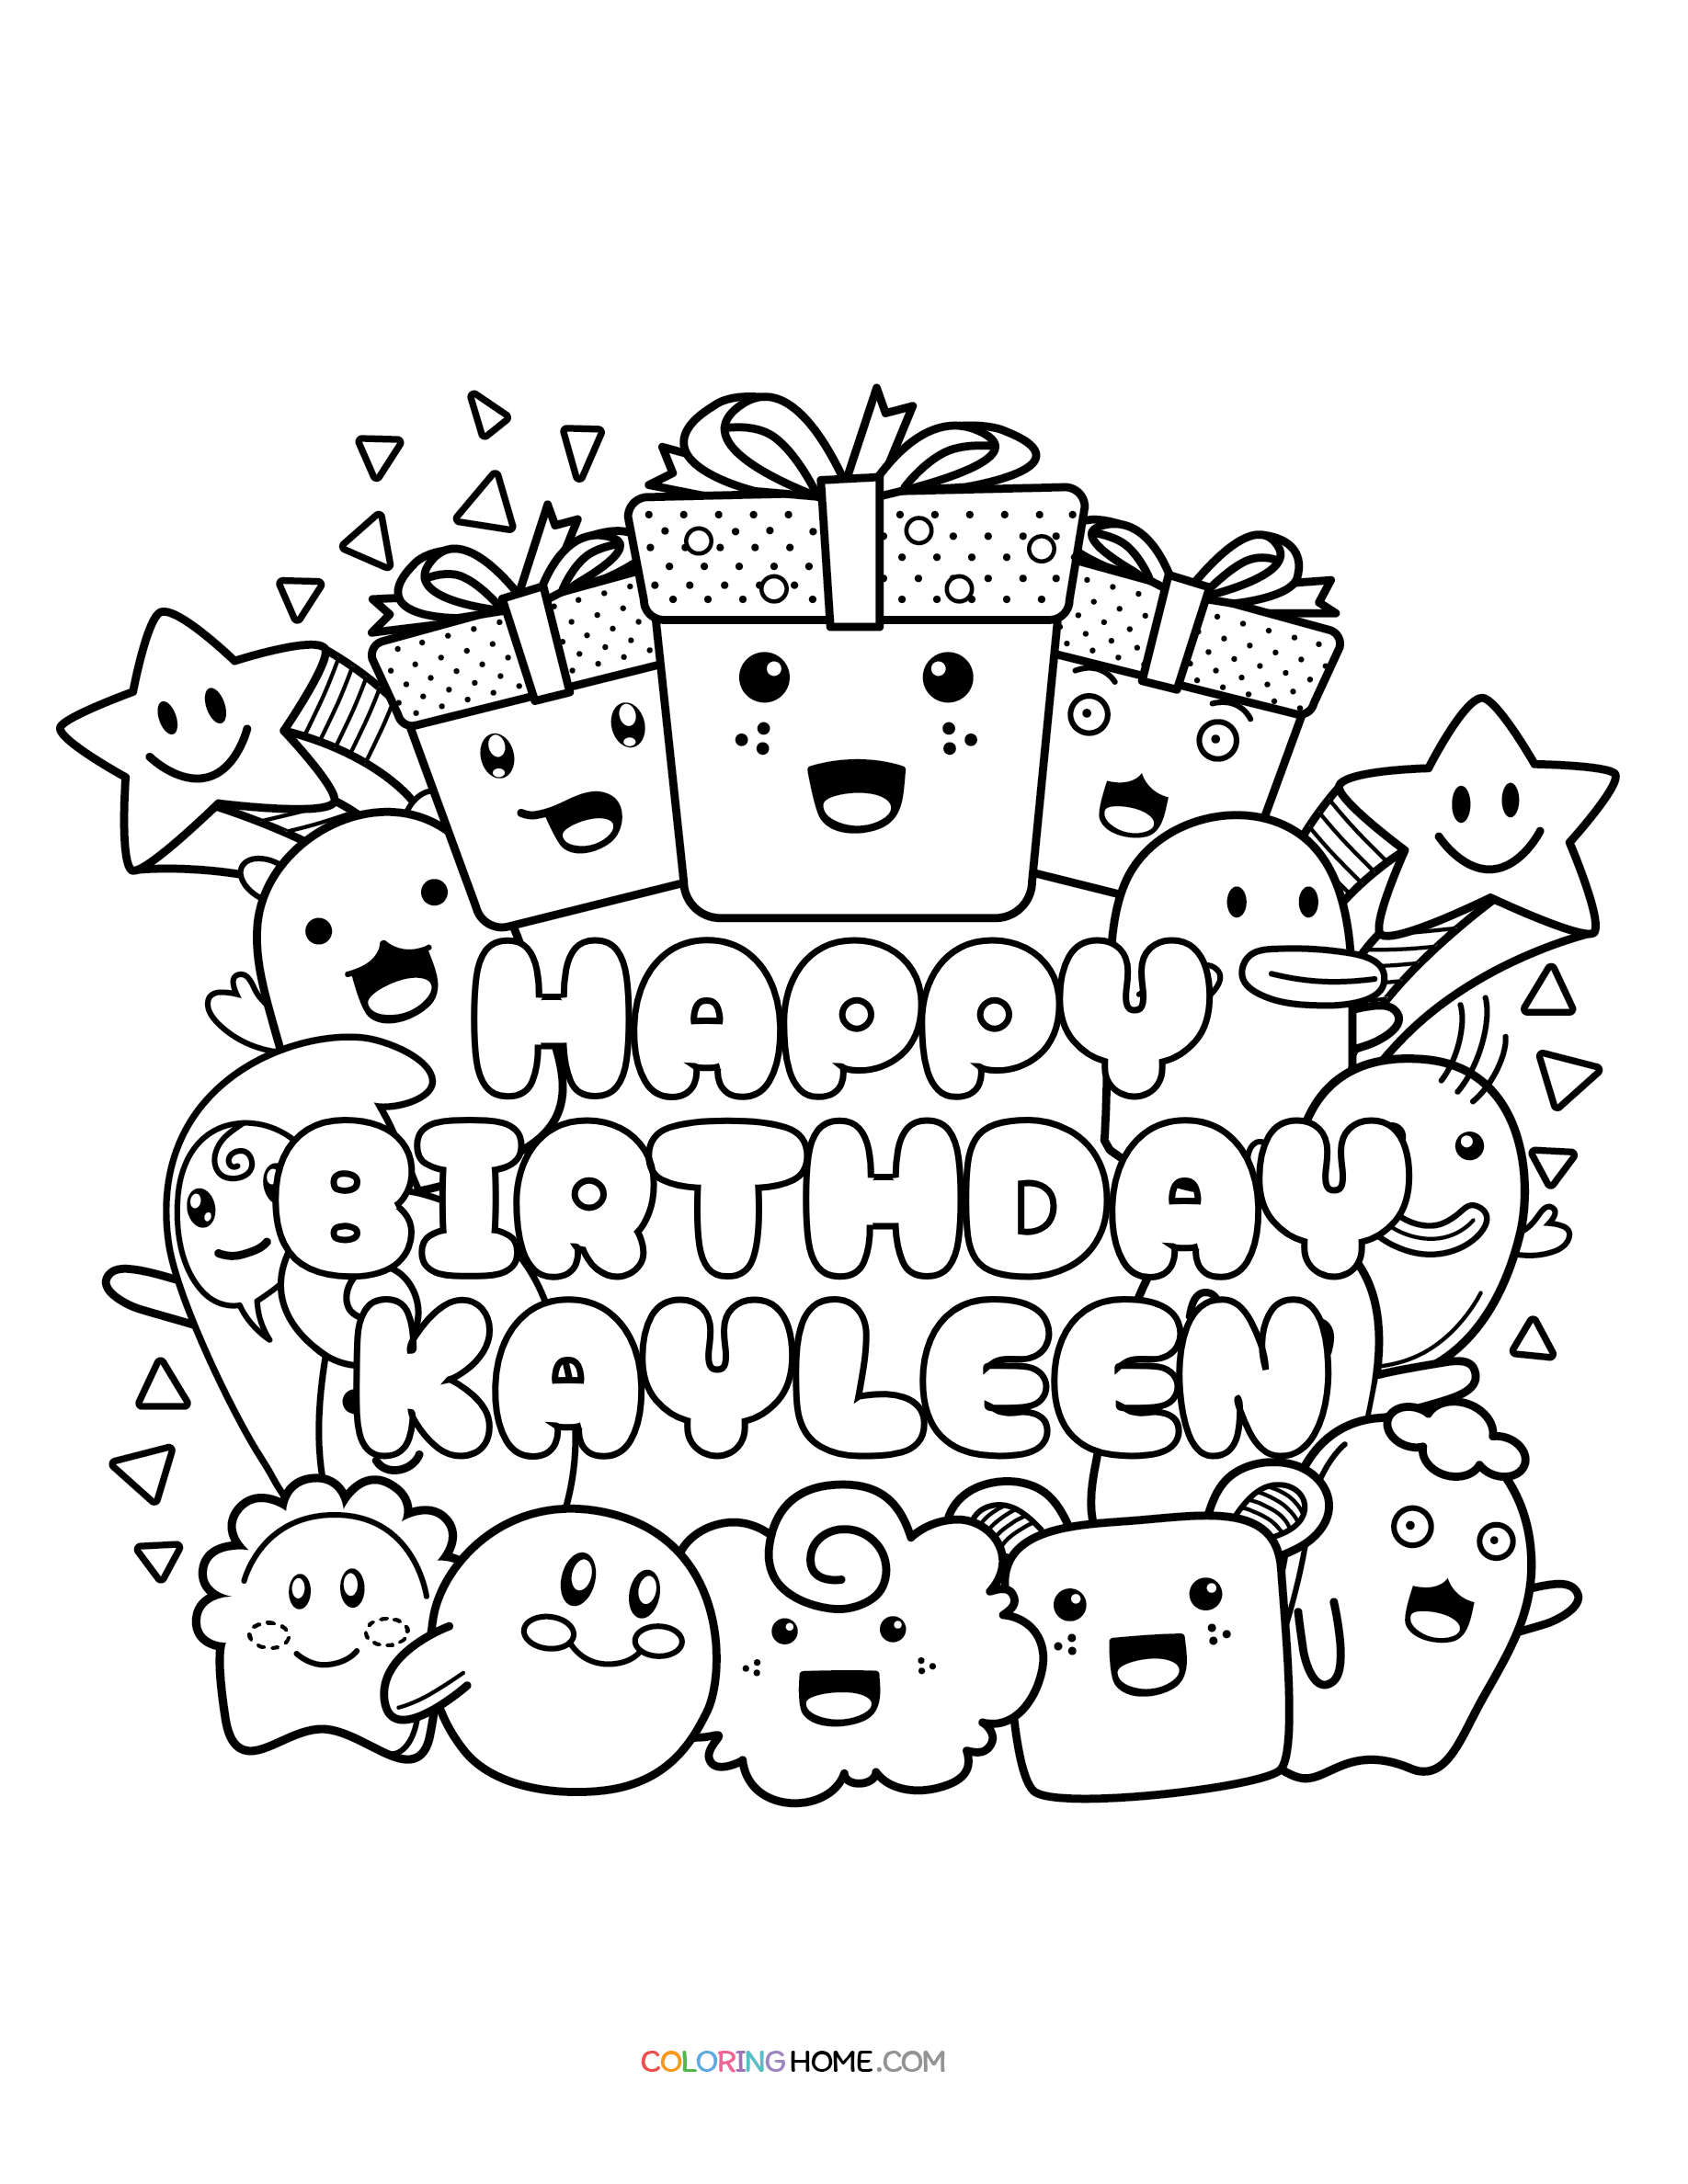 Happy Birthday Kayleen coloring page